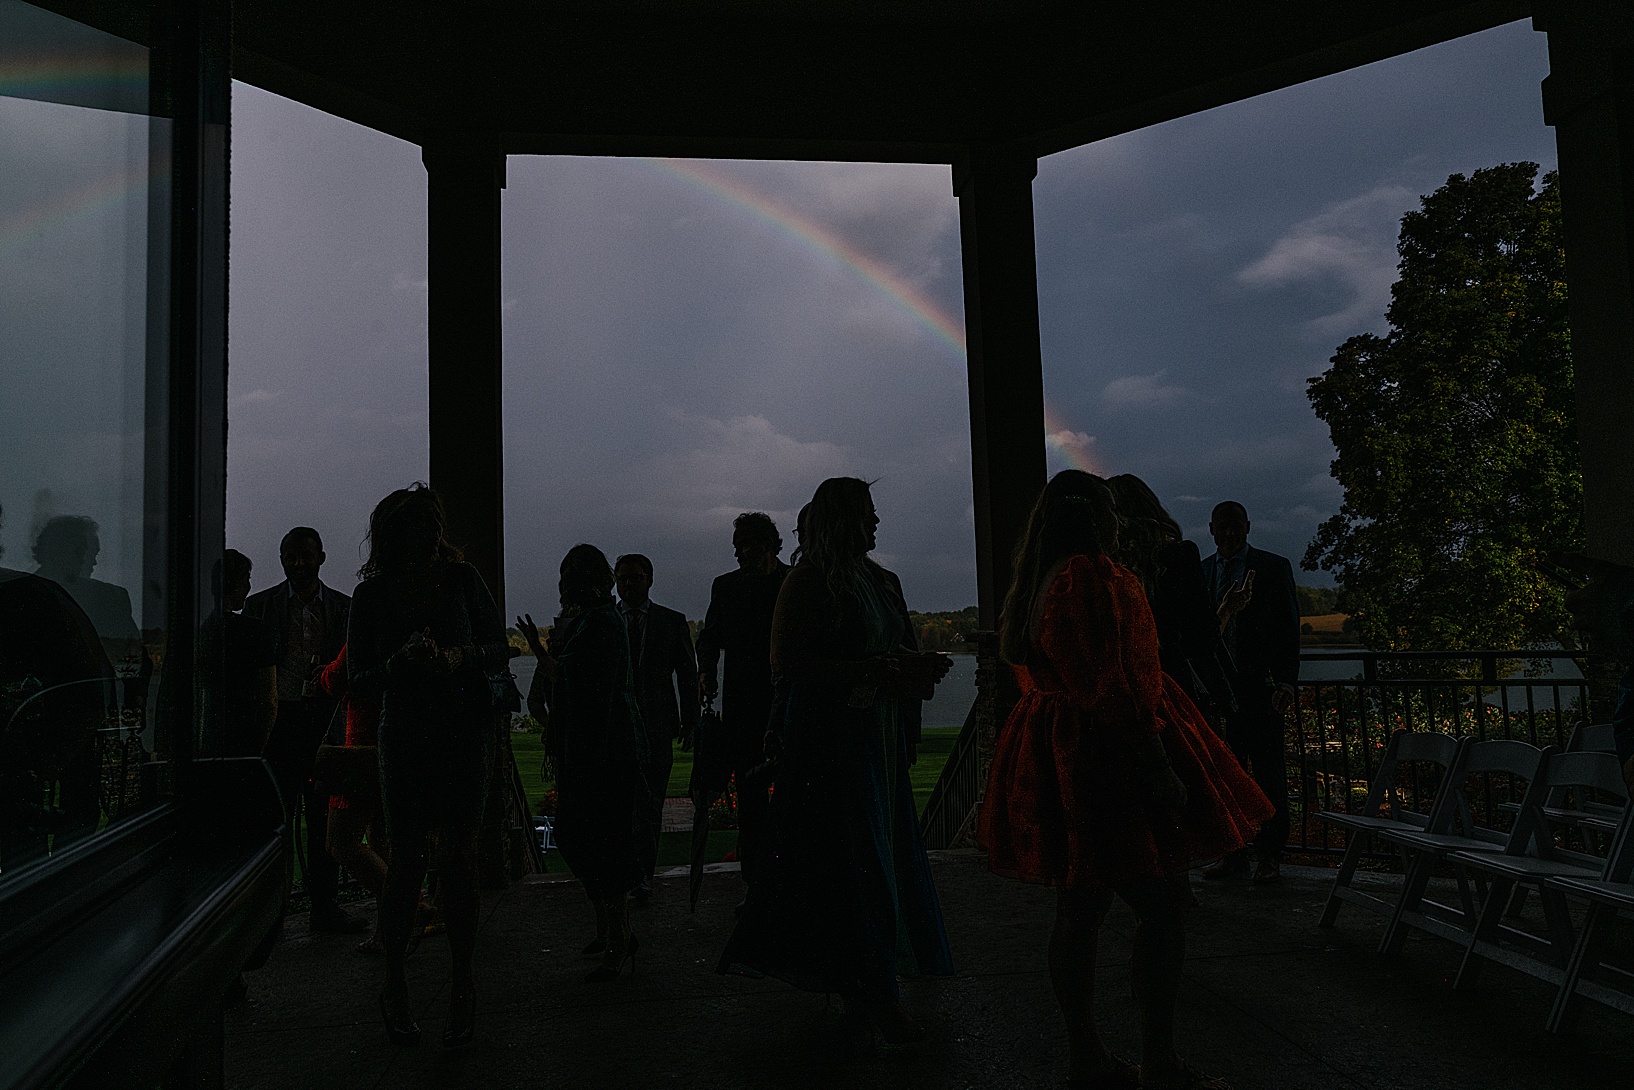 Guests under the lake club pavilion as a rainbow appears in the stormy sky.